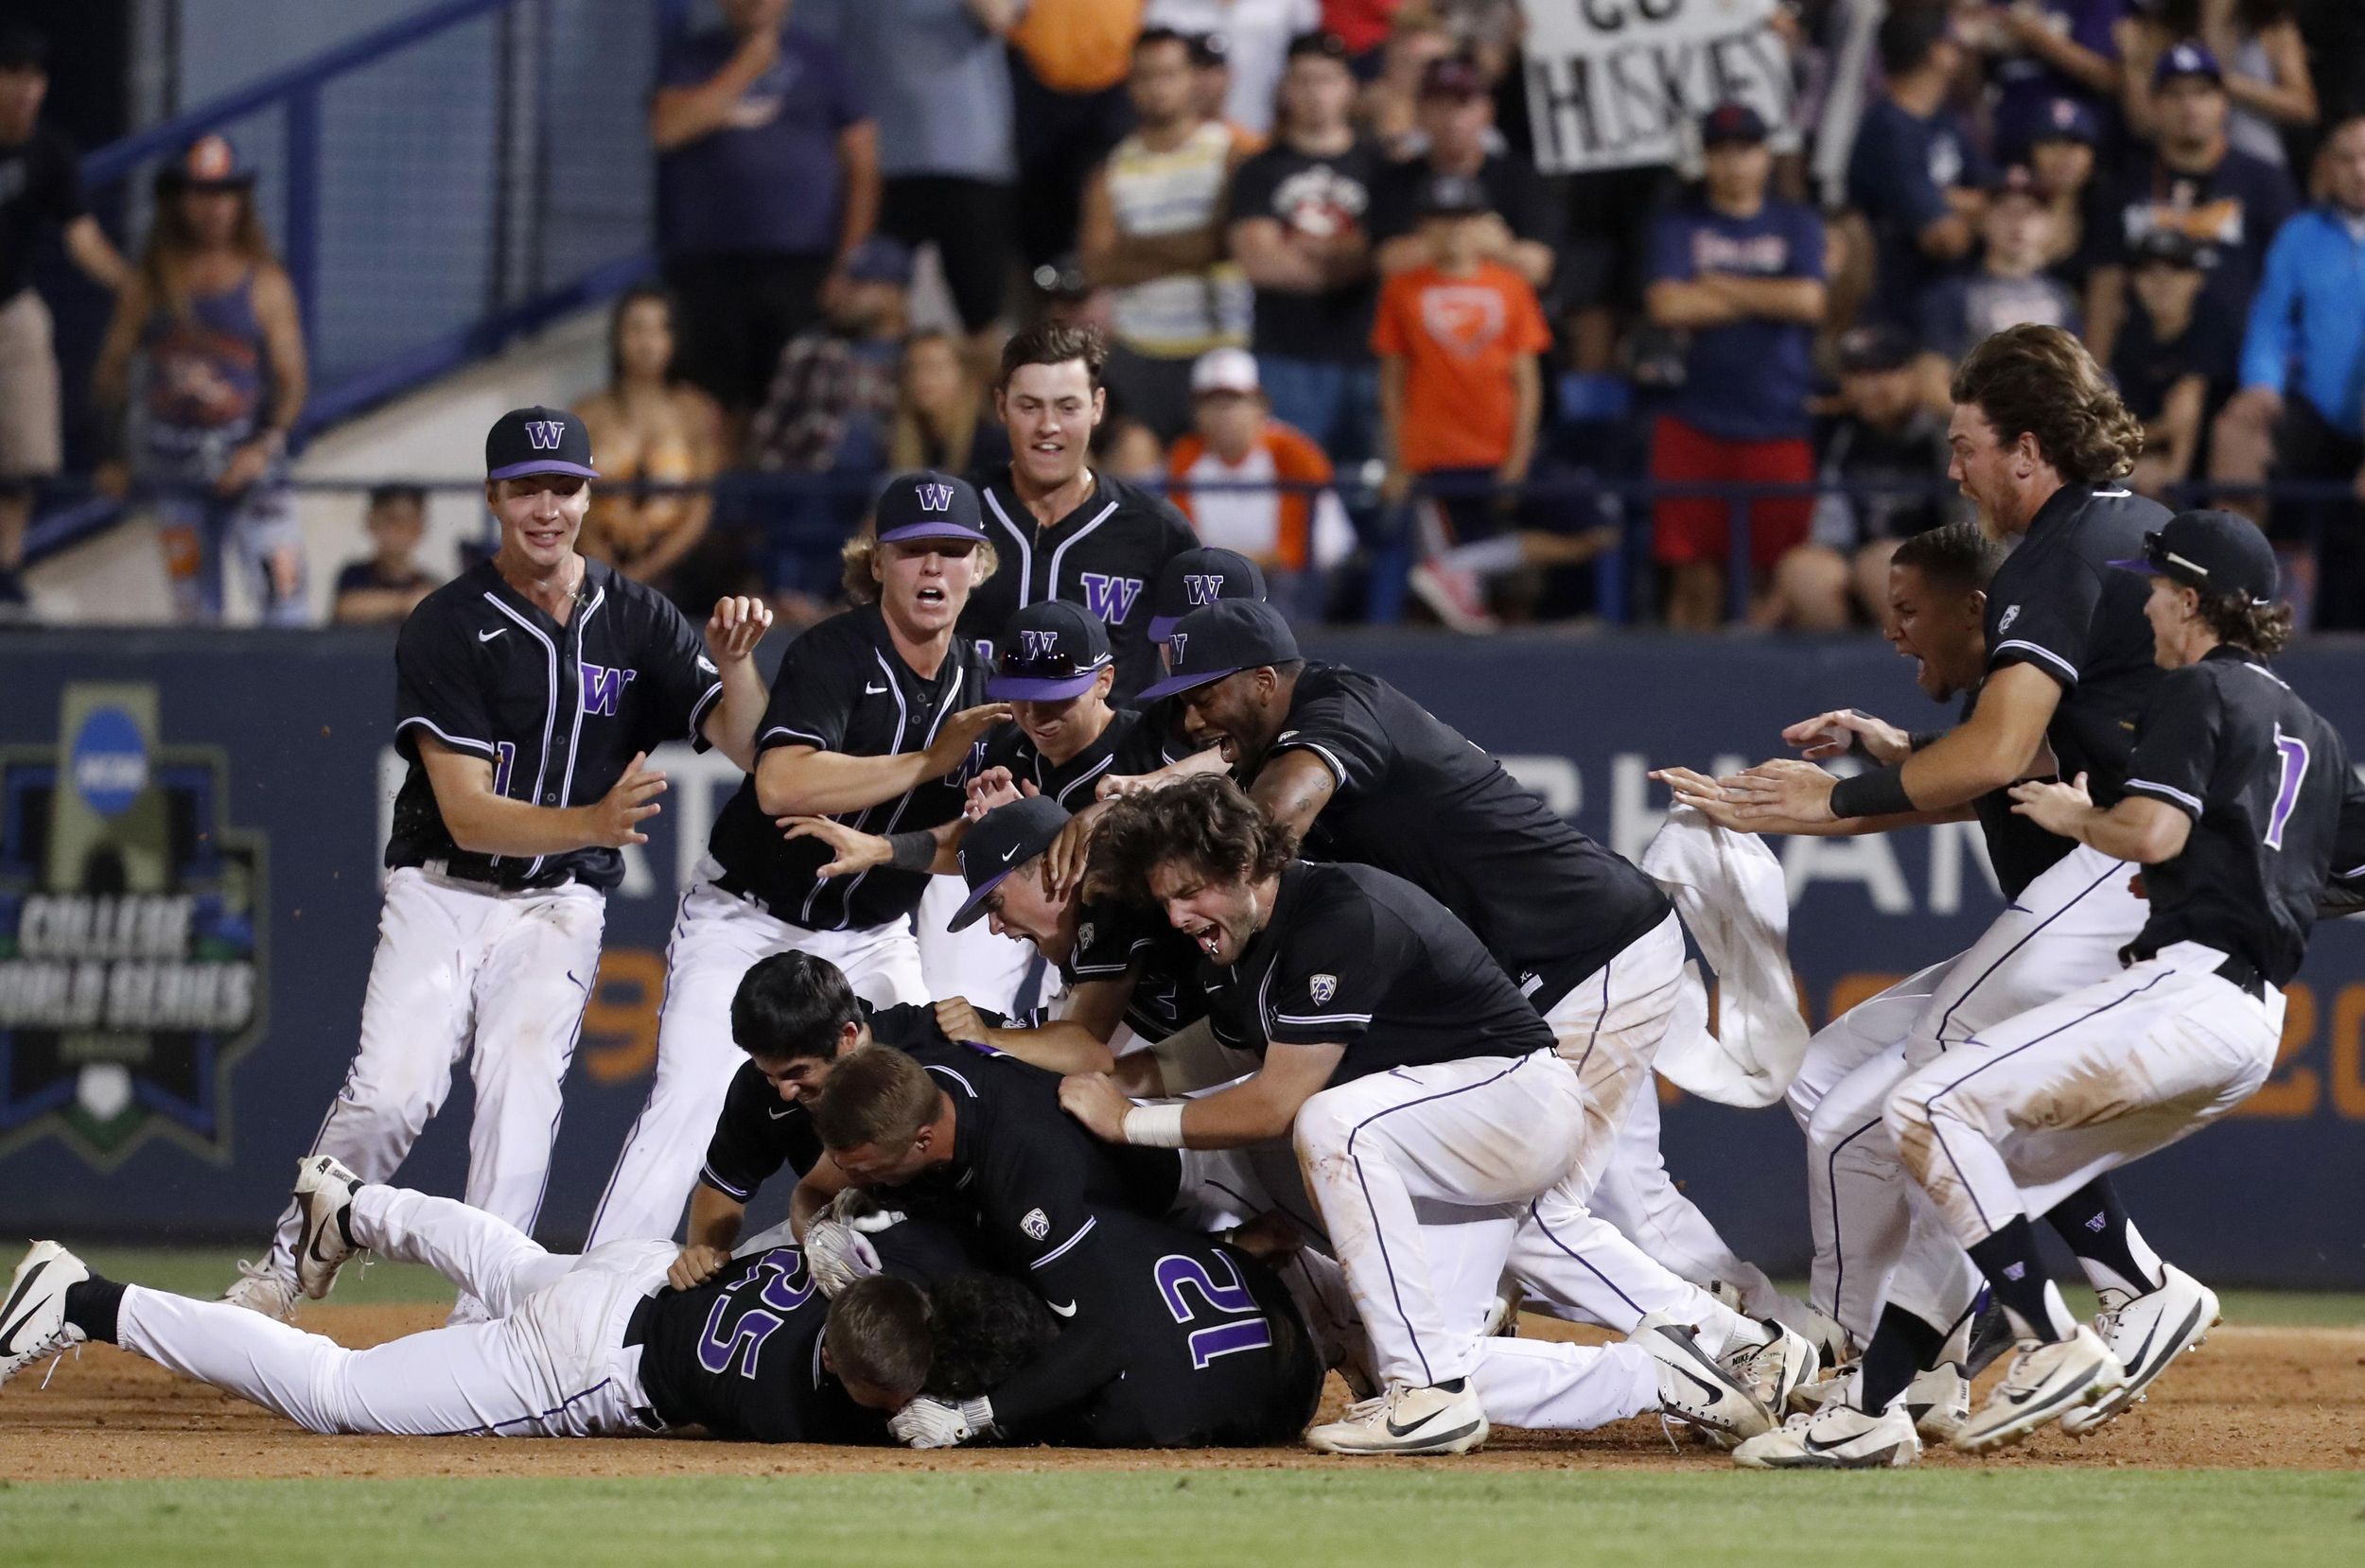 Washington Huskies win in 10th to advance to CWS for first time The